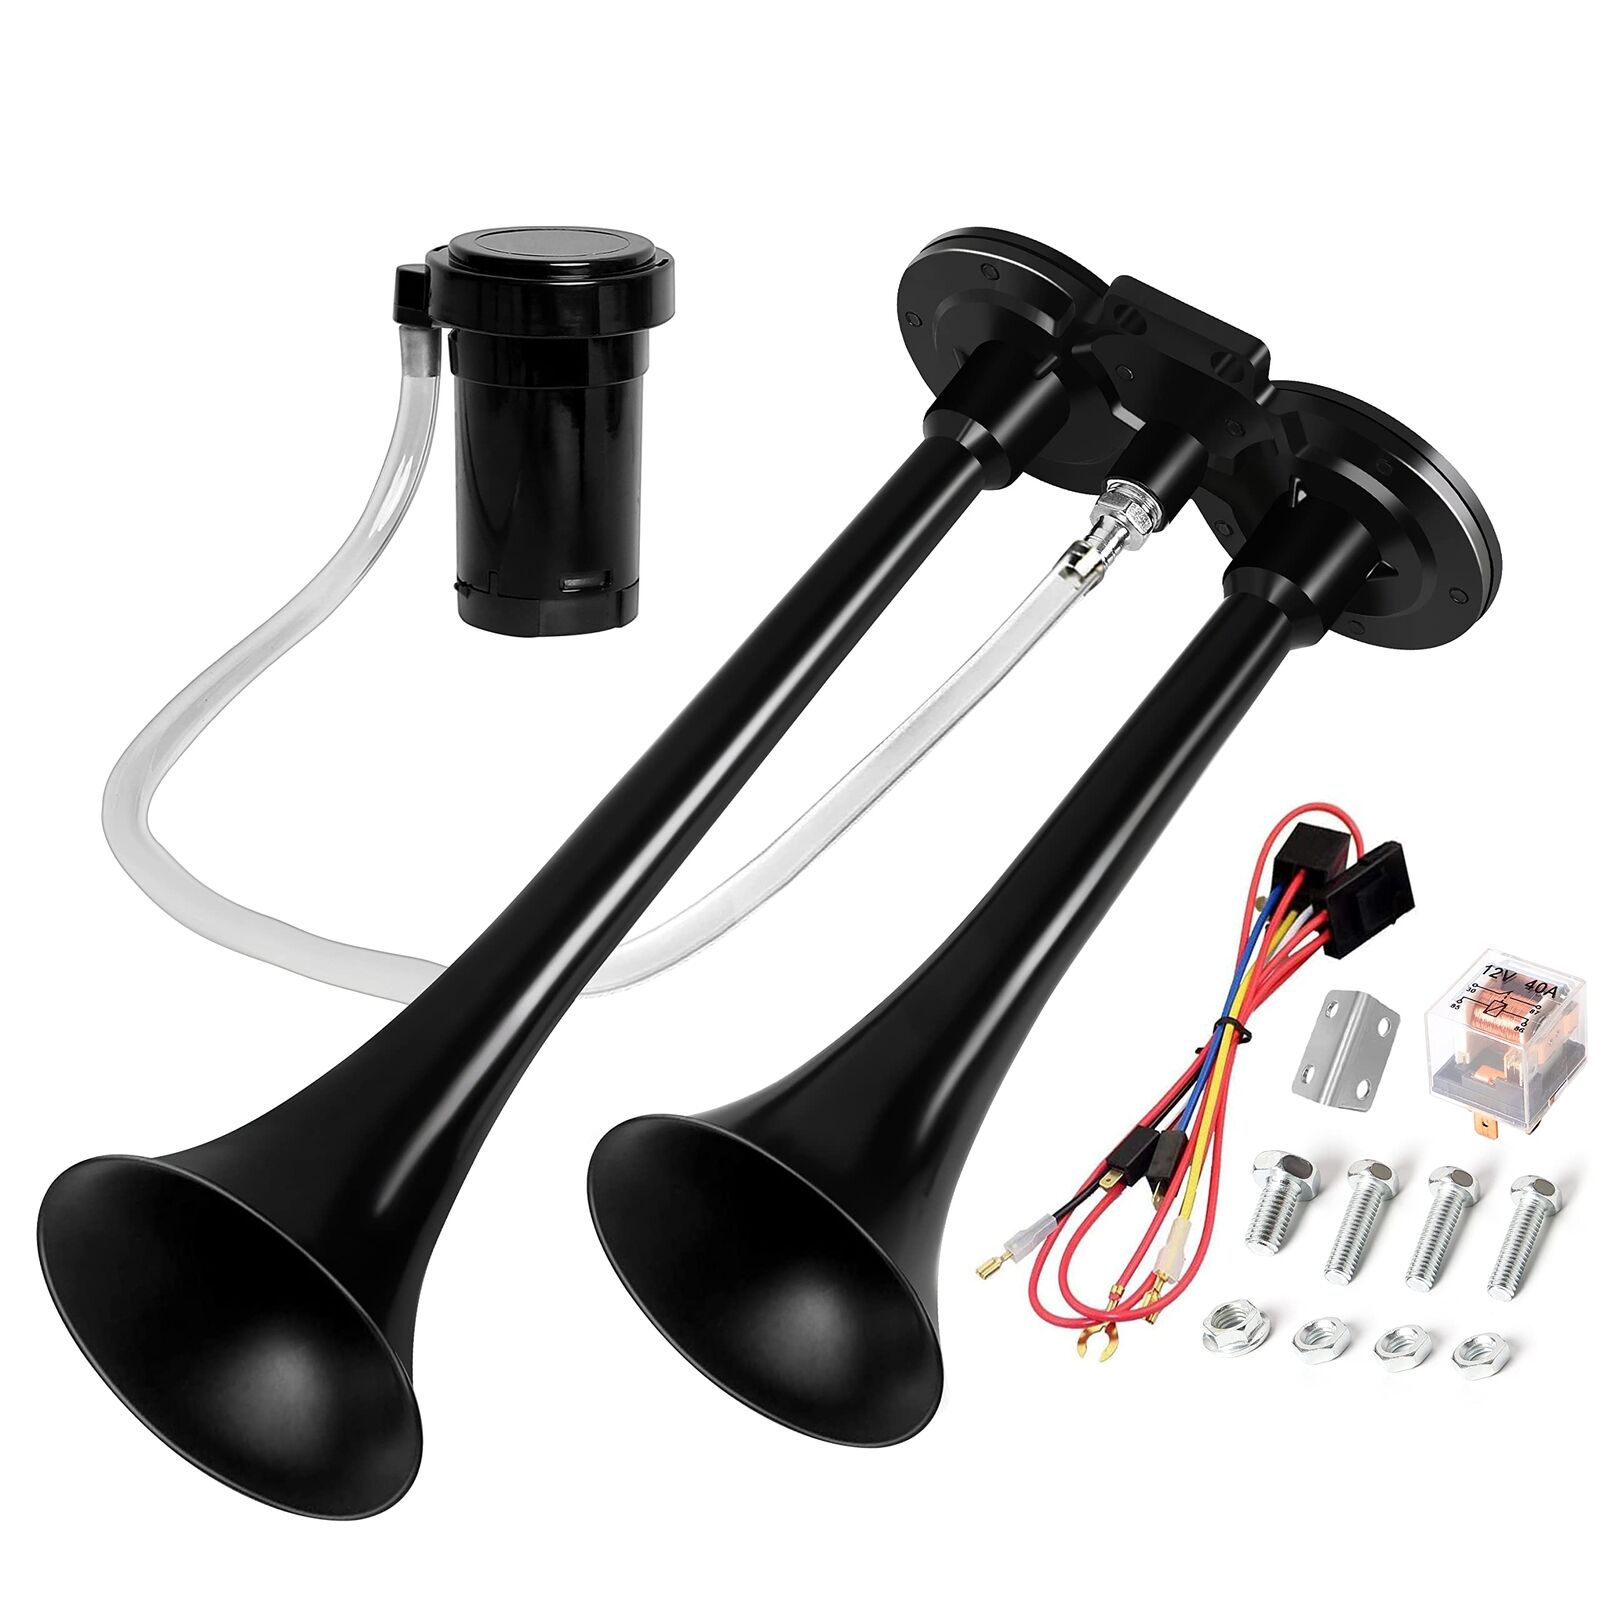 Super Loud Dual Trumpet Air Horn Kit with Compressor for Any 12V Vehicles Trucks